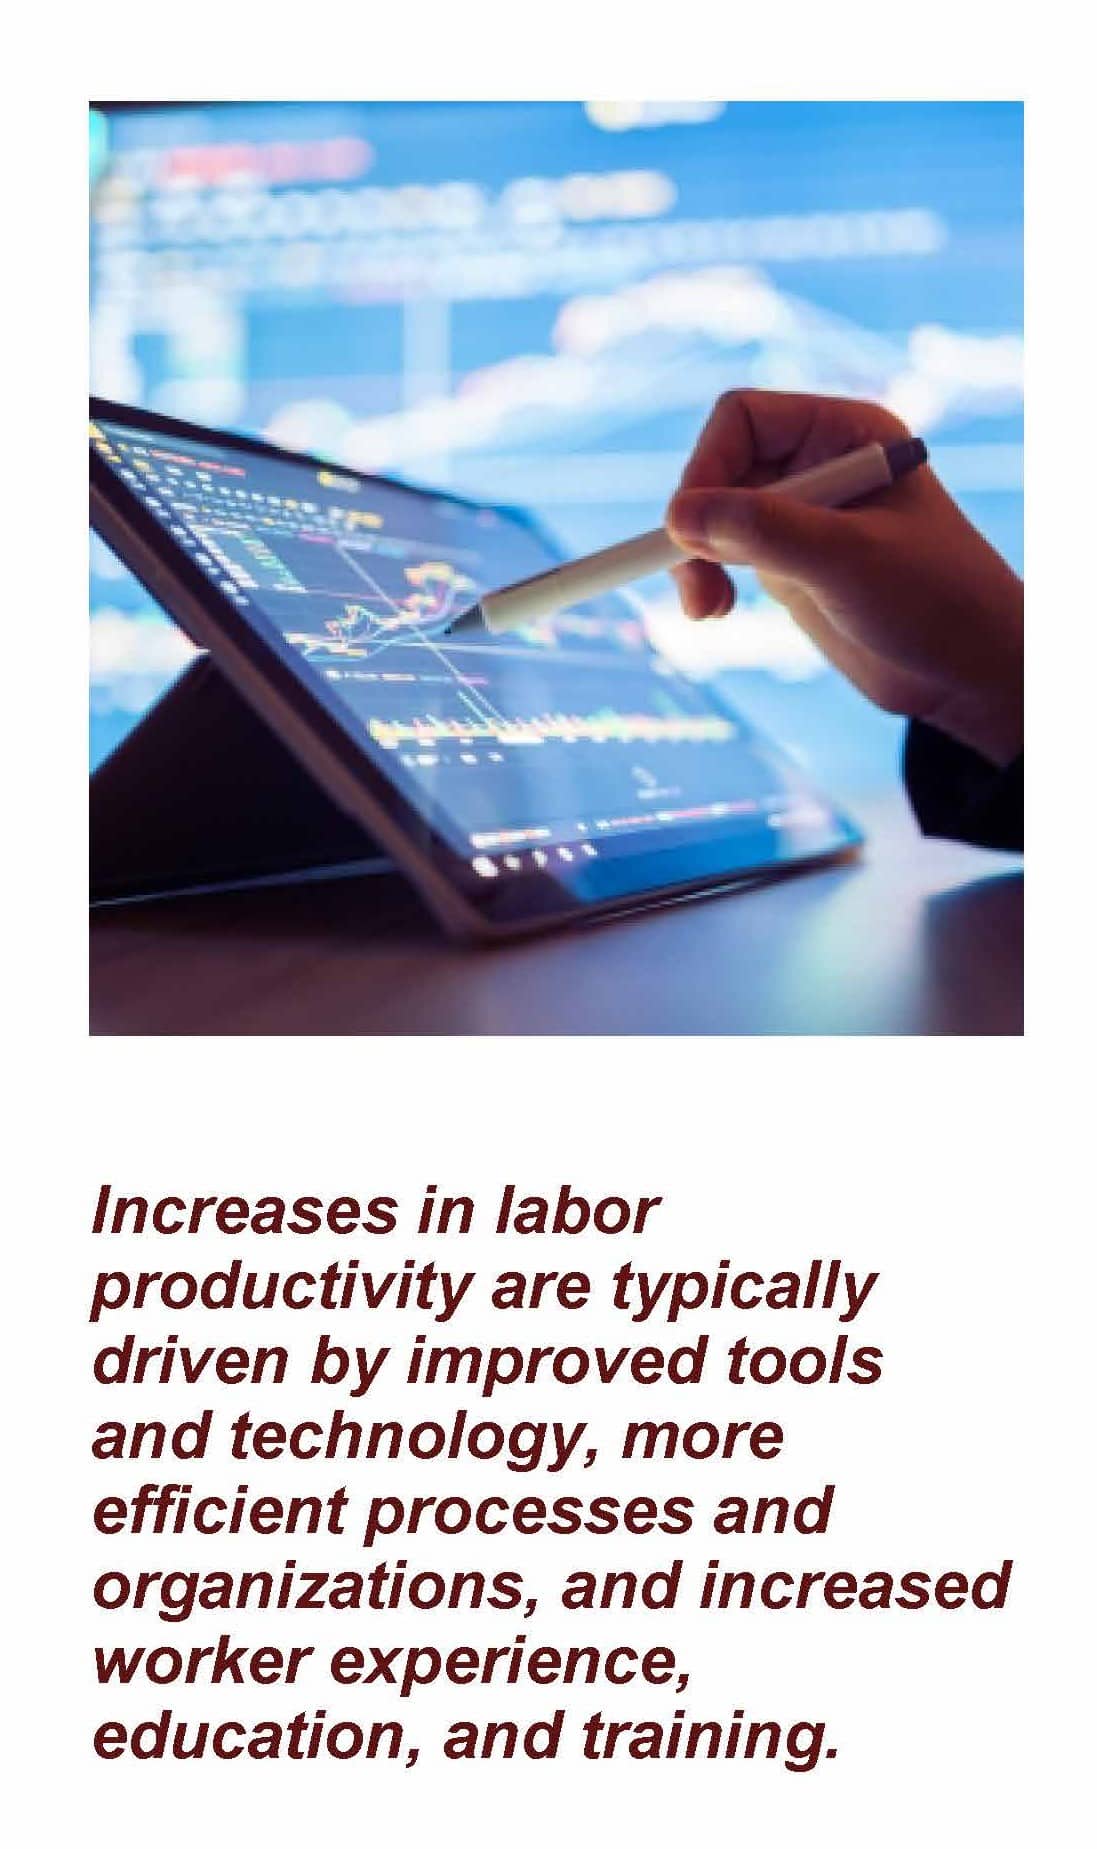 A hand using a iPen on an iPad. Wording for image: Increases in labor productivity are typically driven by improved tools and technology, more efficient processes and organizations, and increased worker experience, education, and training. Article title: Can Productivity Keep Driving the U.S 